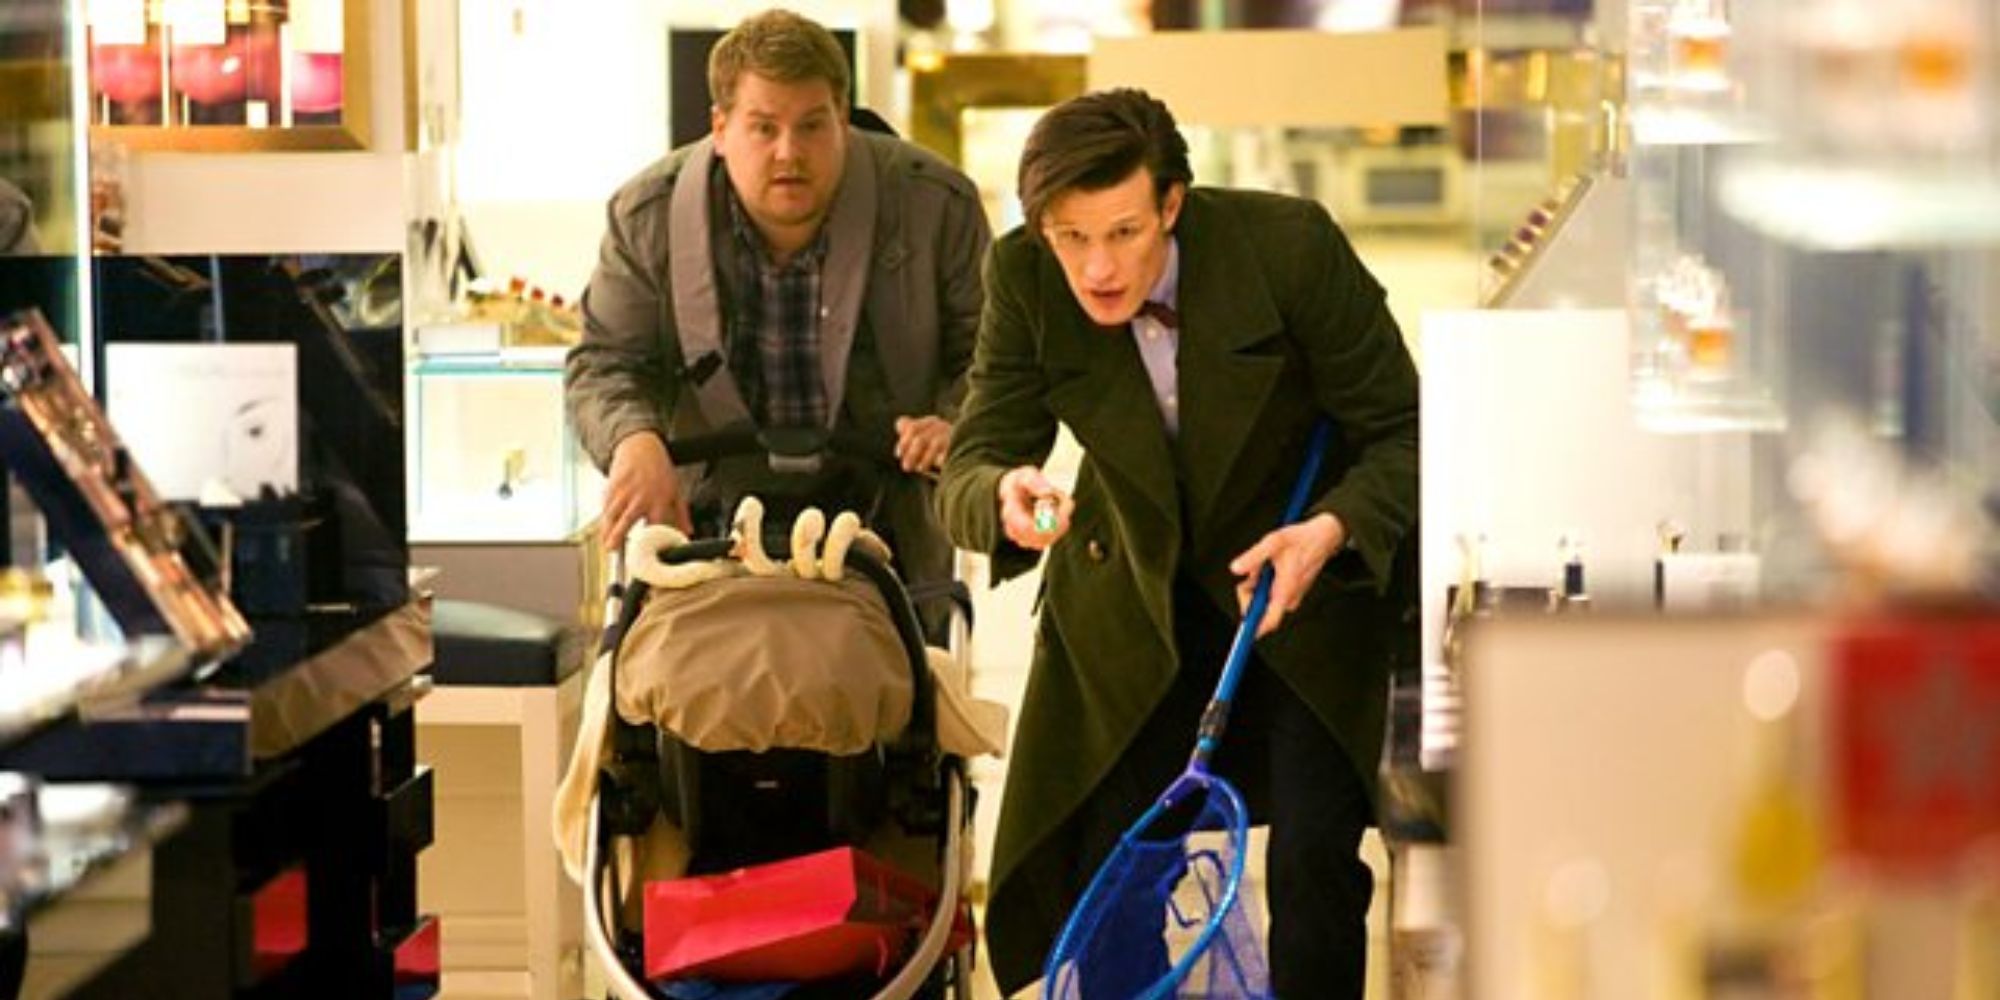 Two guys pushing a baby trolly in the mall